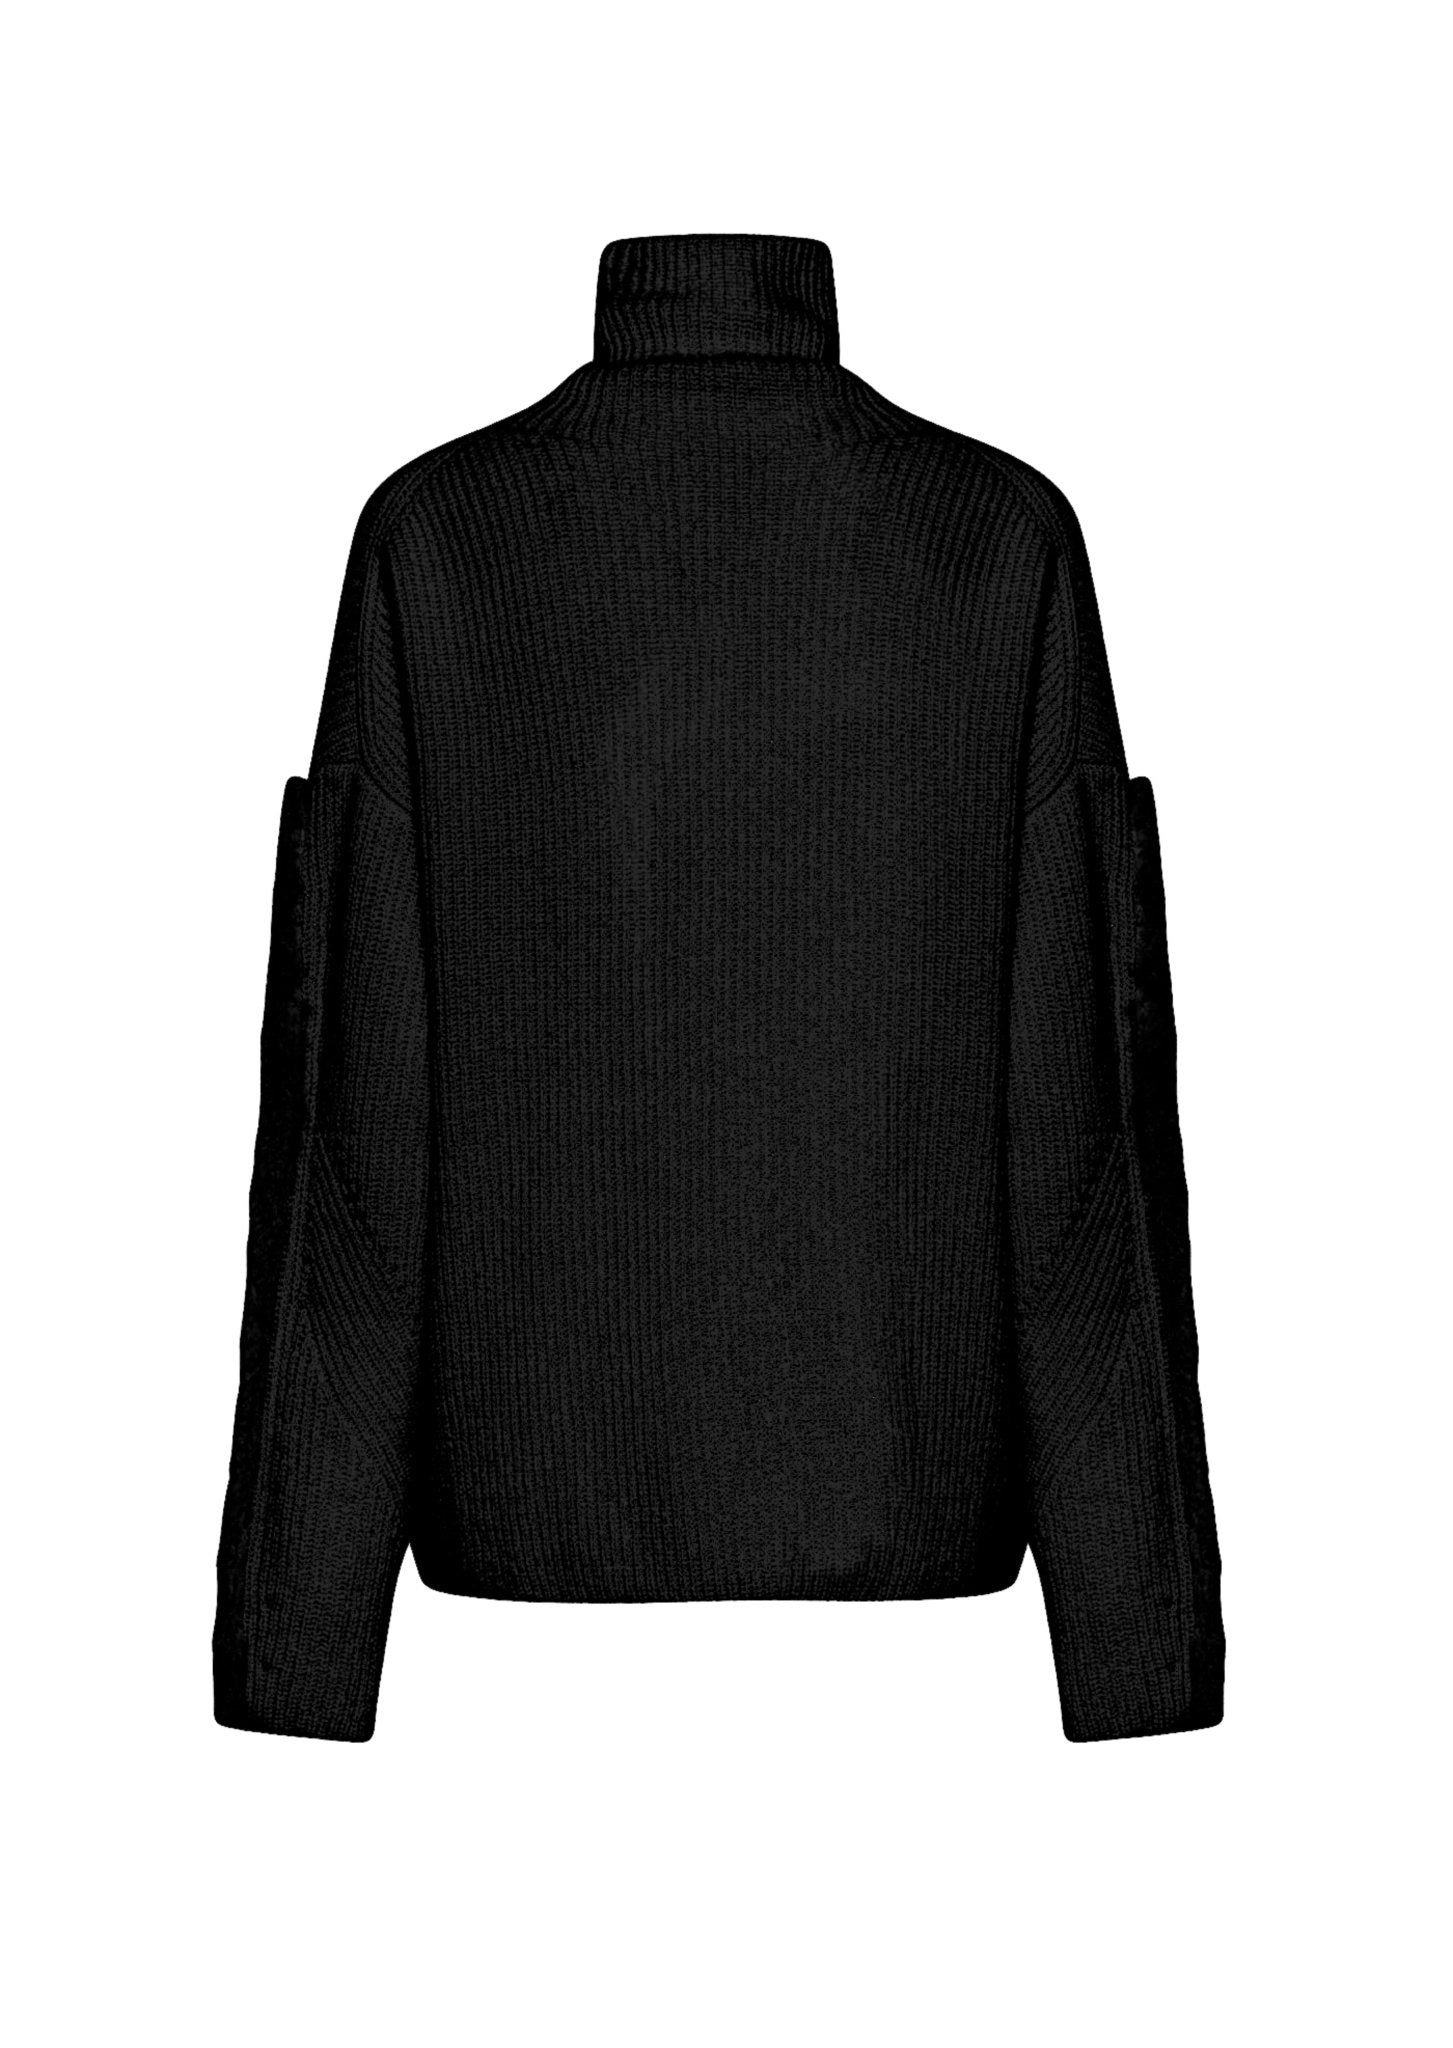 Cashmere Shearling Turtleneck - LAPOINTE